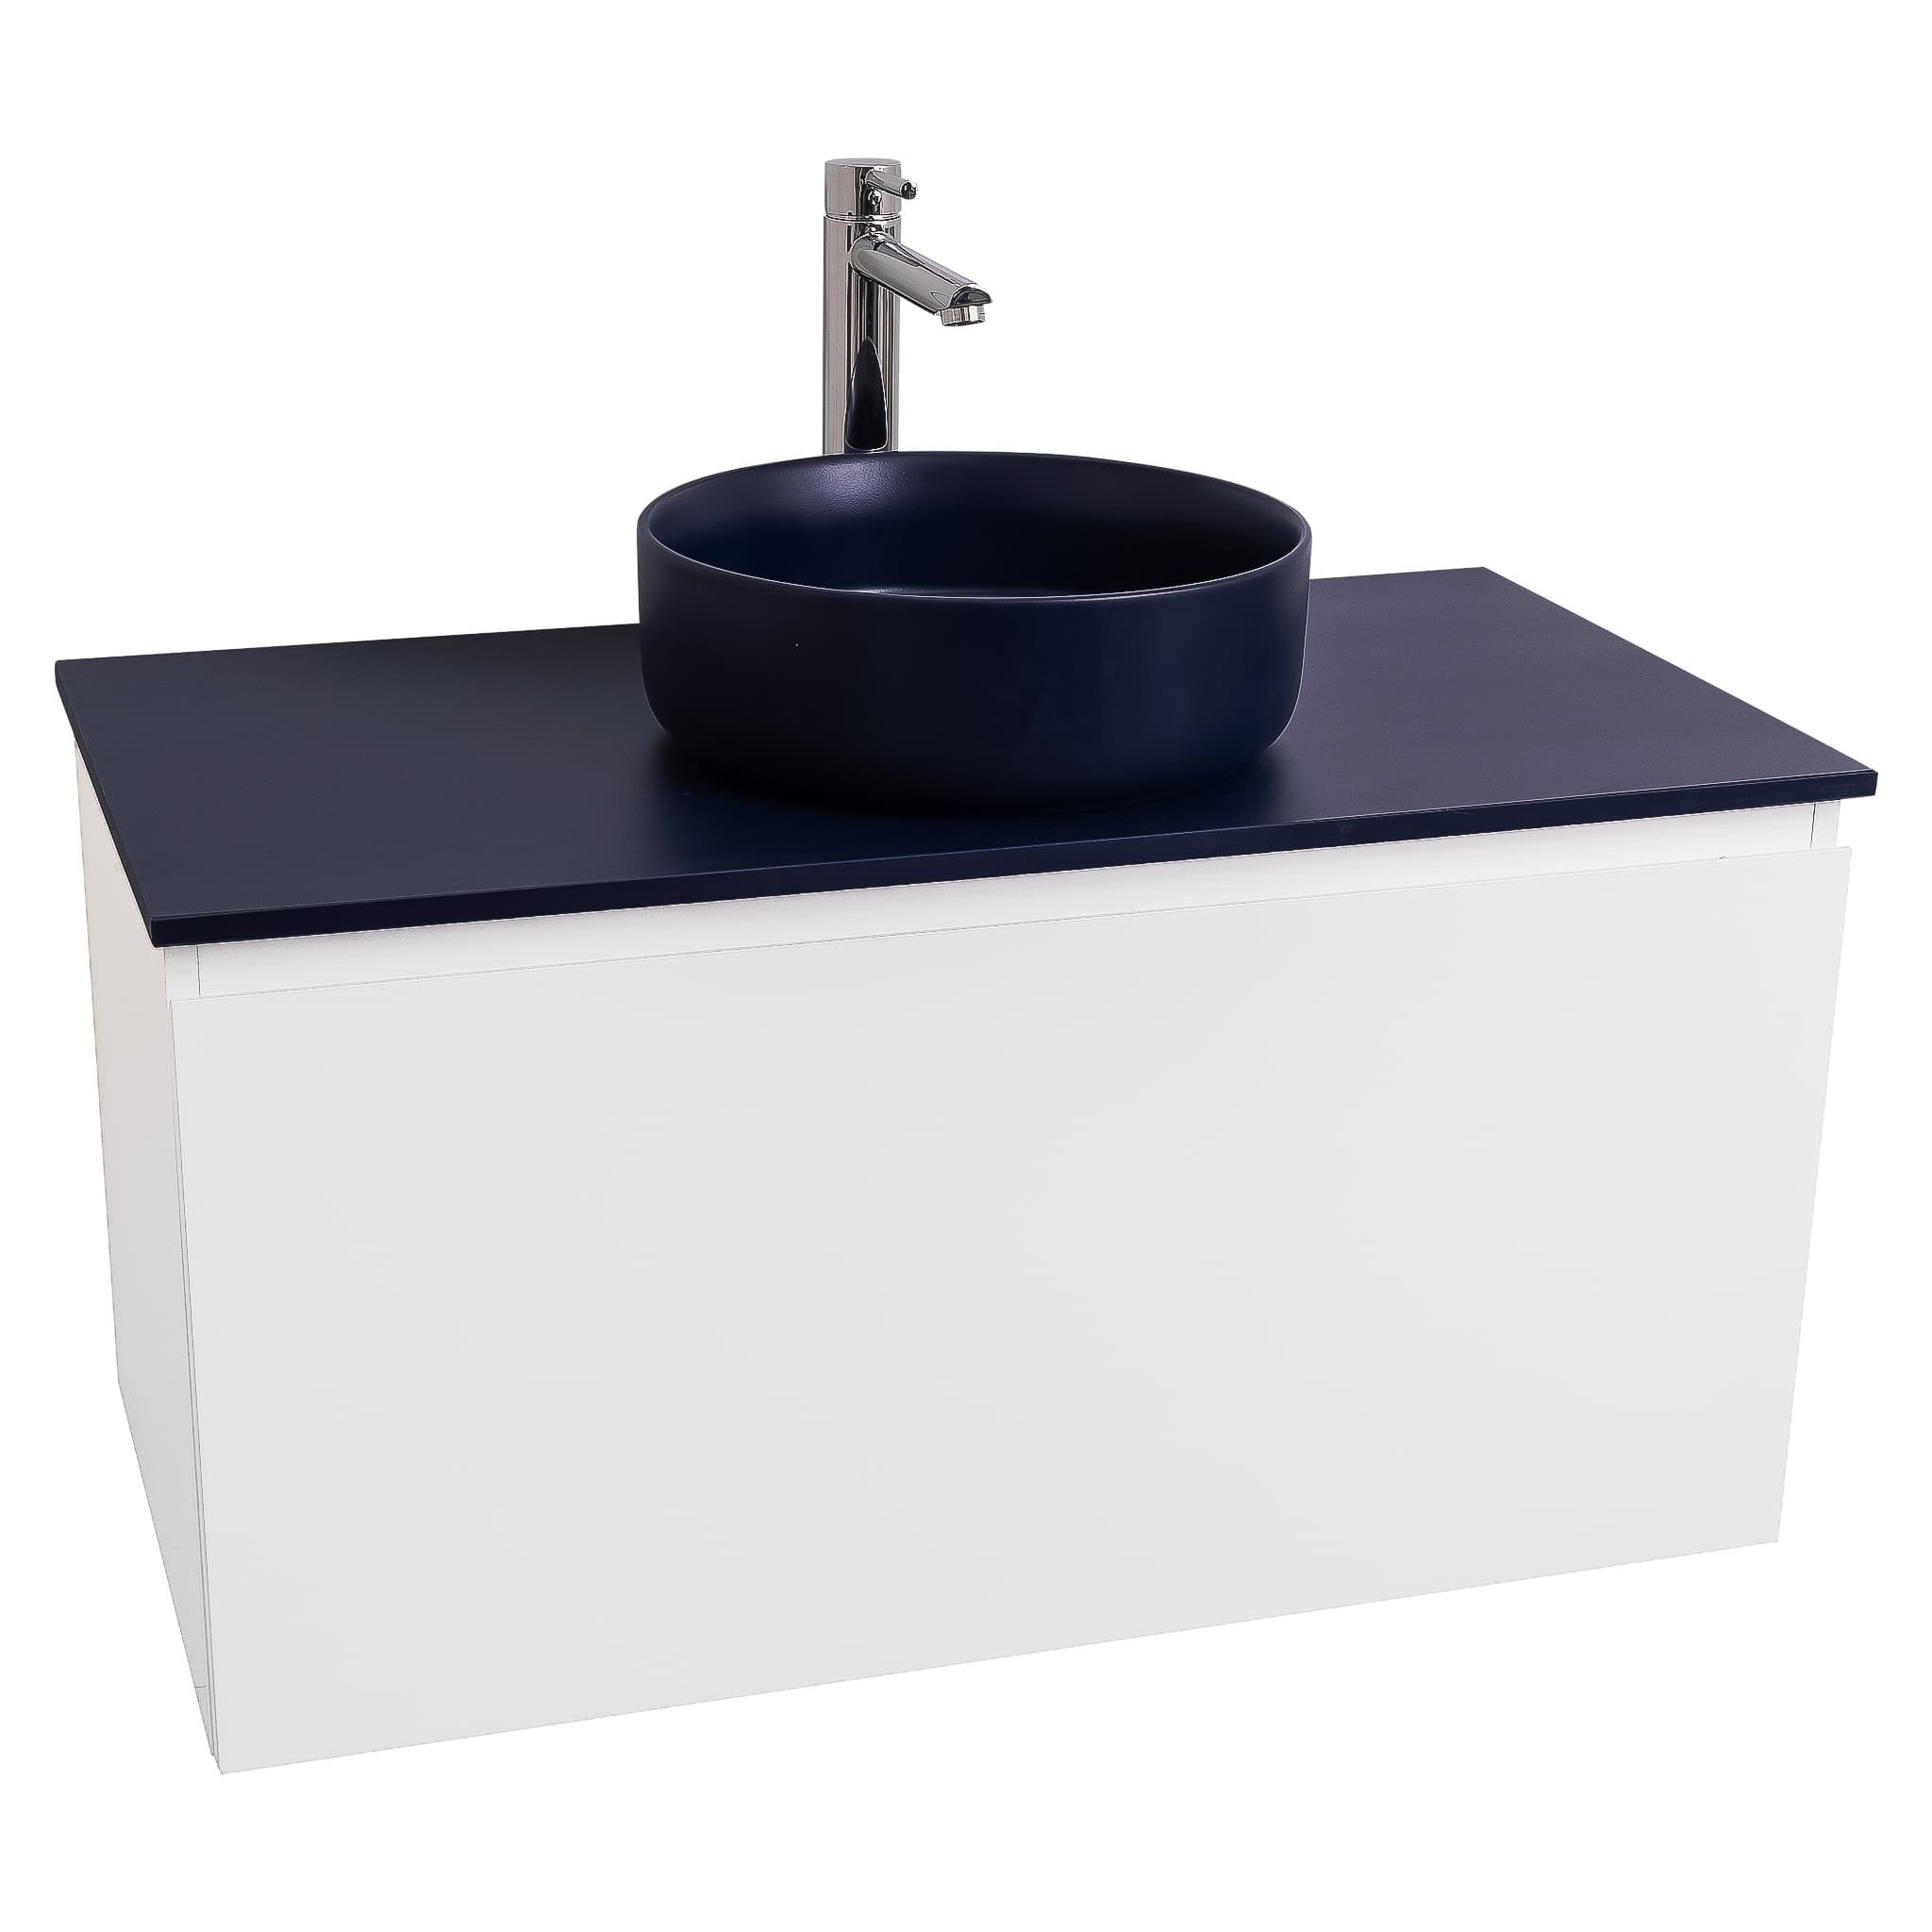 Venice 31.5 White High Gloss Cabinet, Ares Navy Blue Top And Ares Navy Blue Ceramic Basin, Wall Mounted Modern Vanity Set